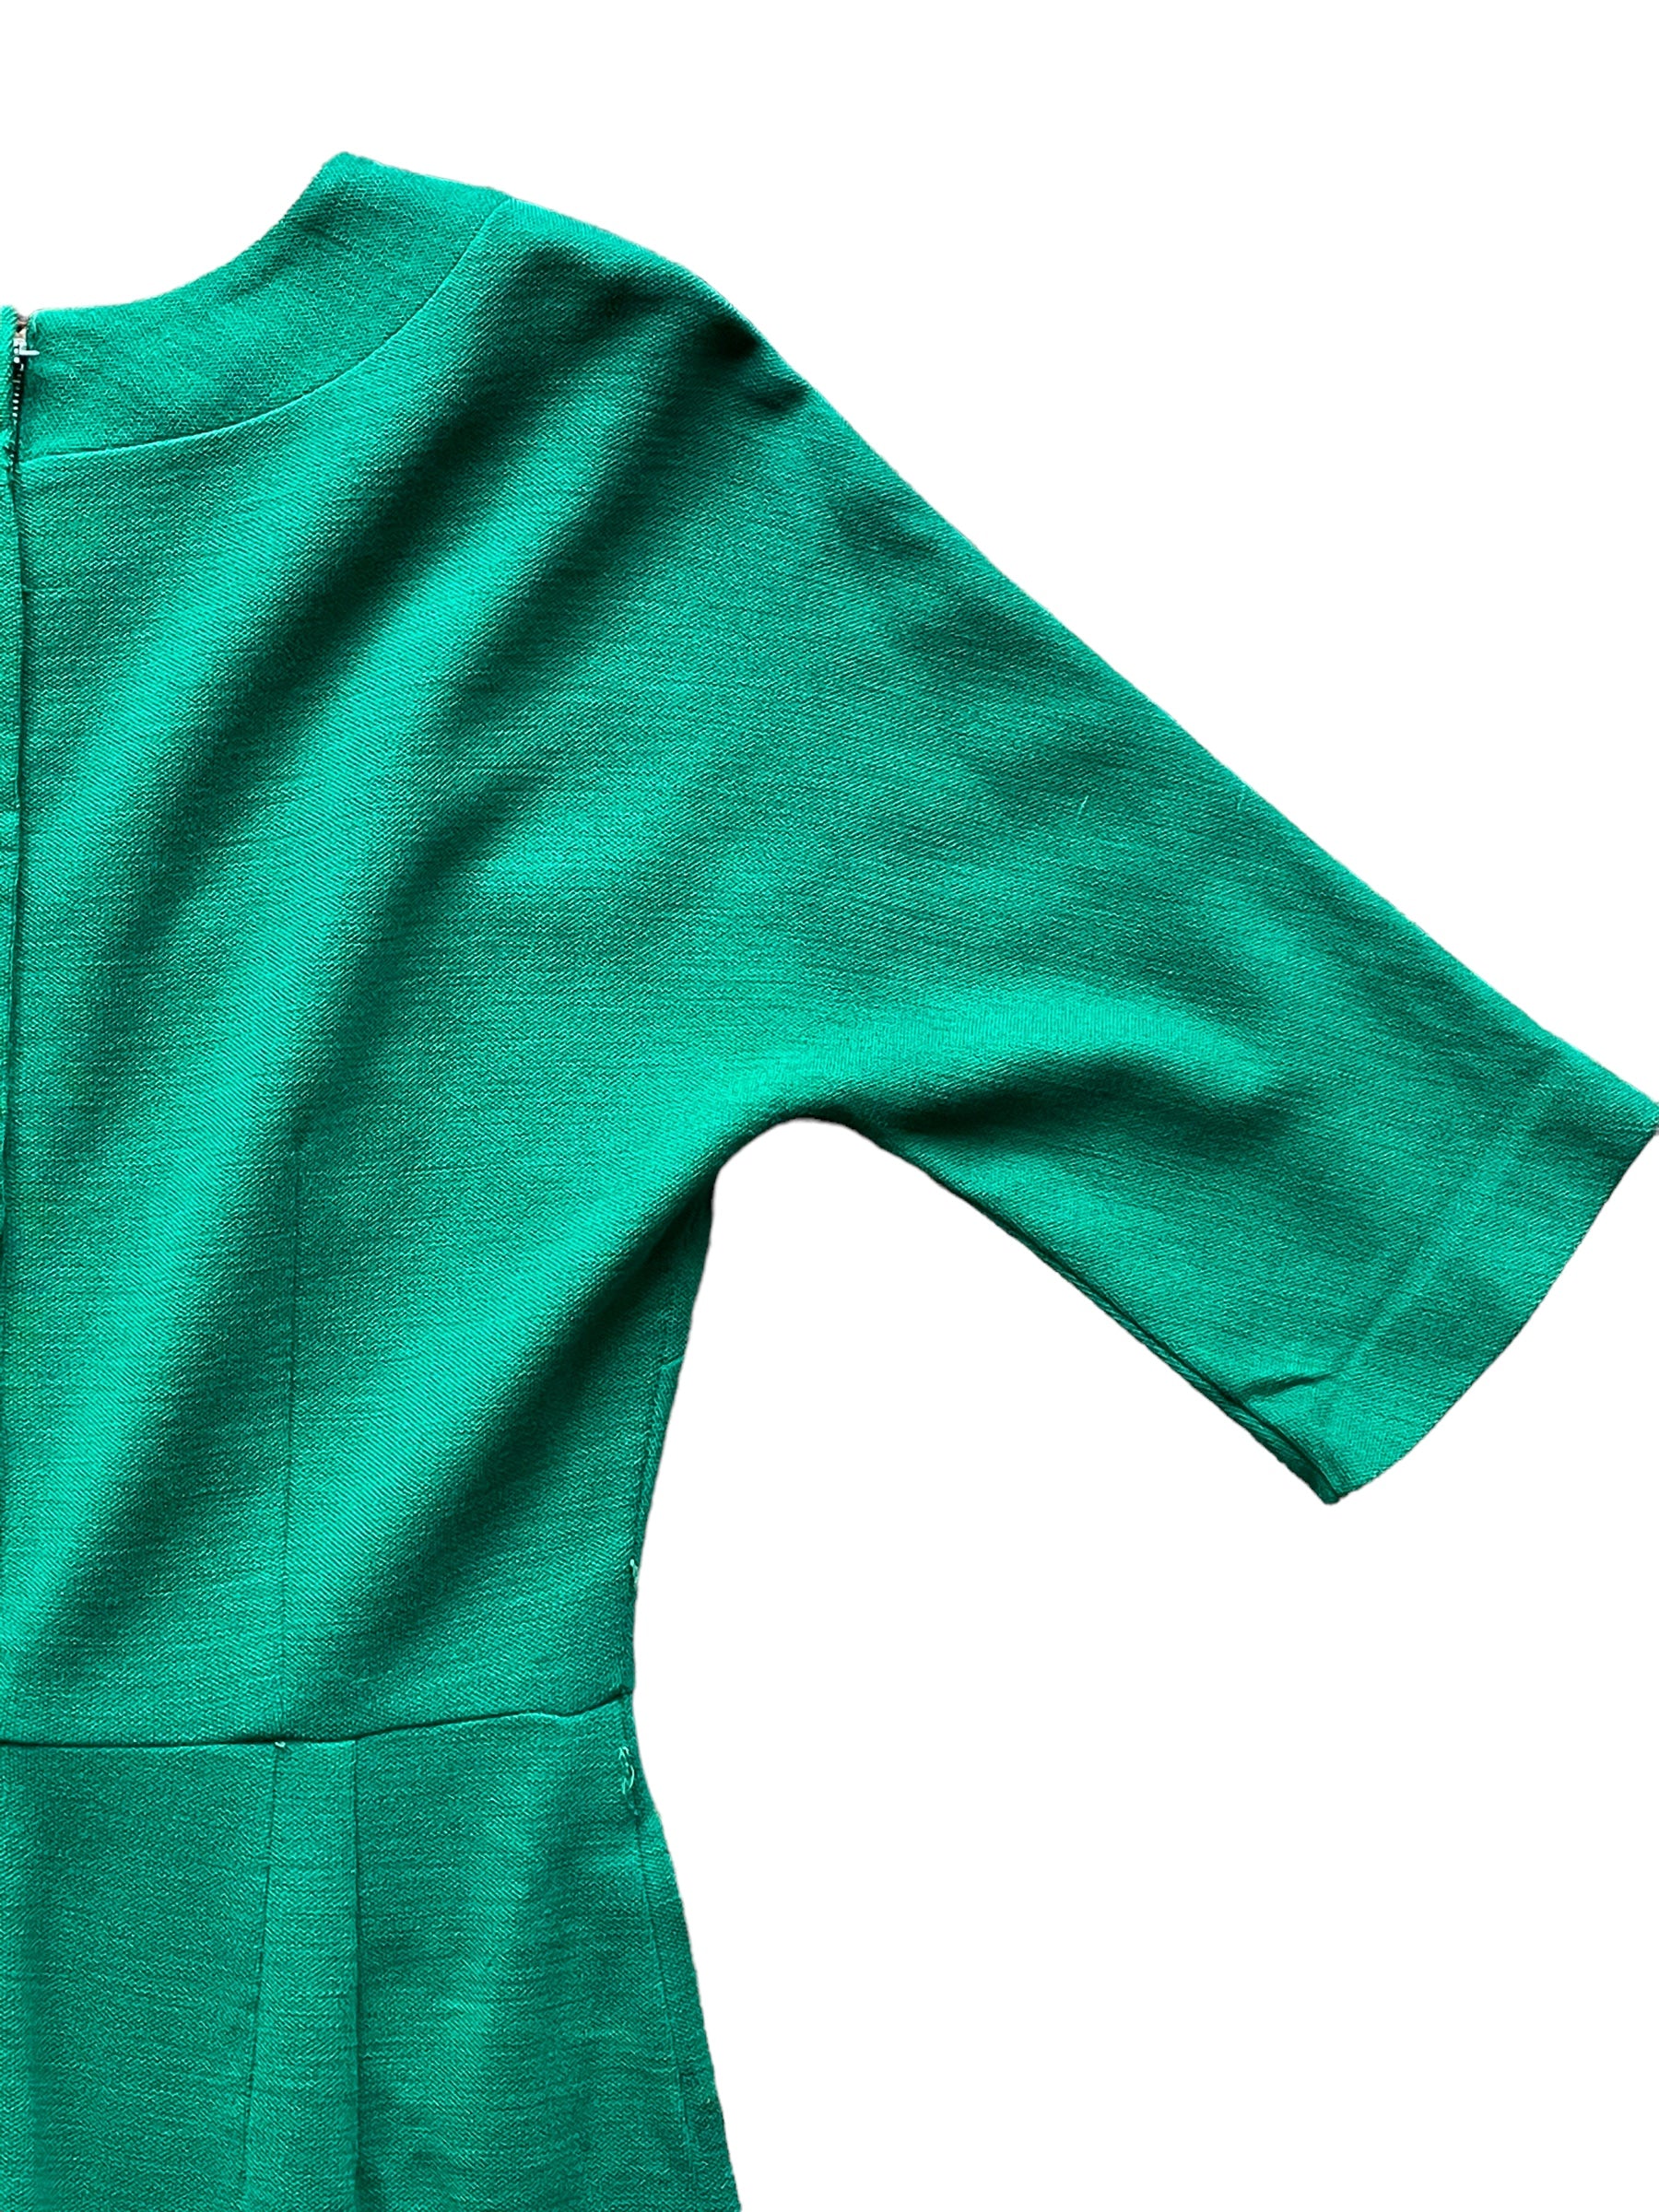 Back top right view of Vintage 1950s Green Wool Wiggle Dress SZ M |  Barn Owl Vintage Dresses| Seattle Vintage Ladies Clothing